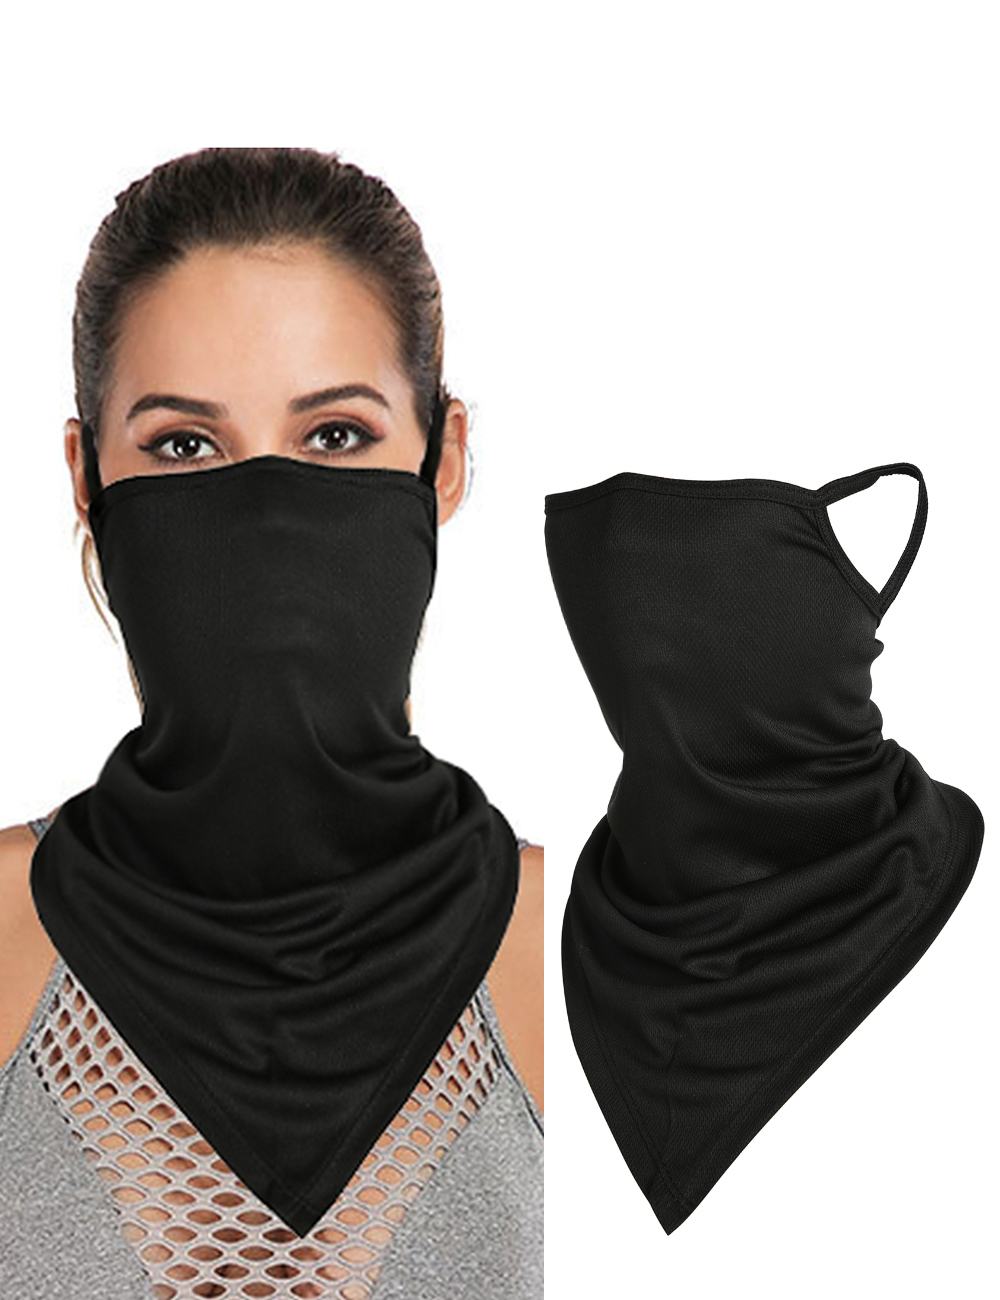 Details about  / Sexy mouth with red lipstick Face Cover /& Neck Gaiter